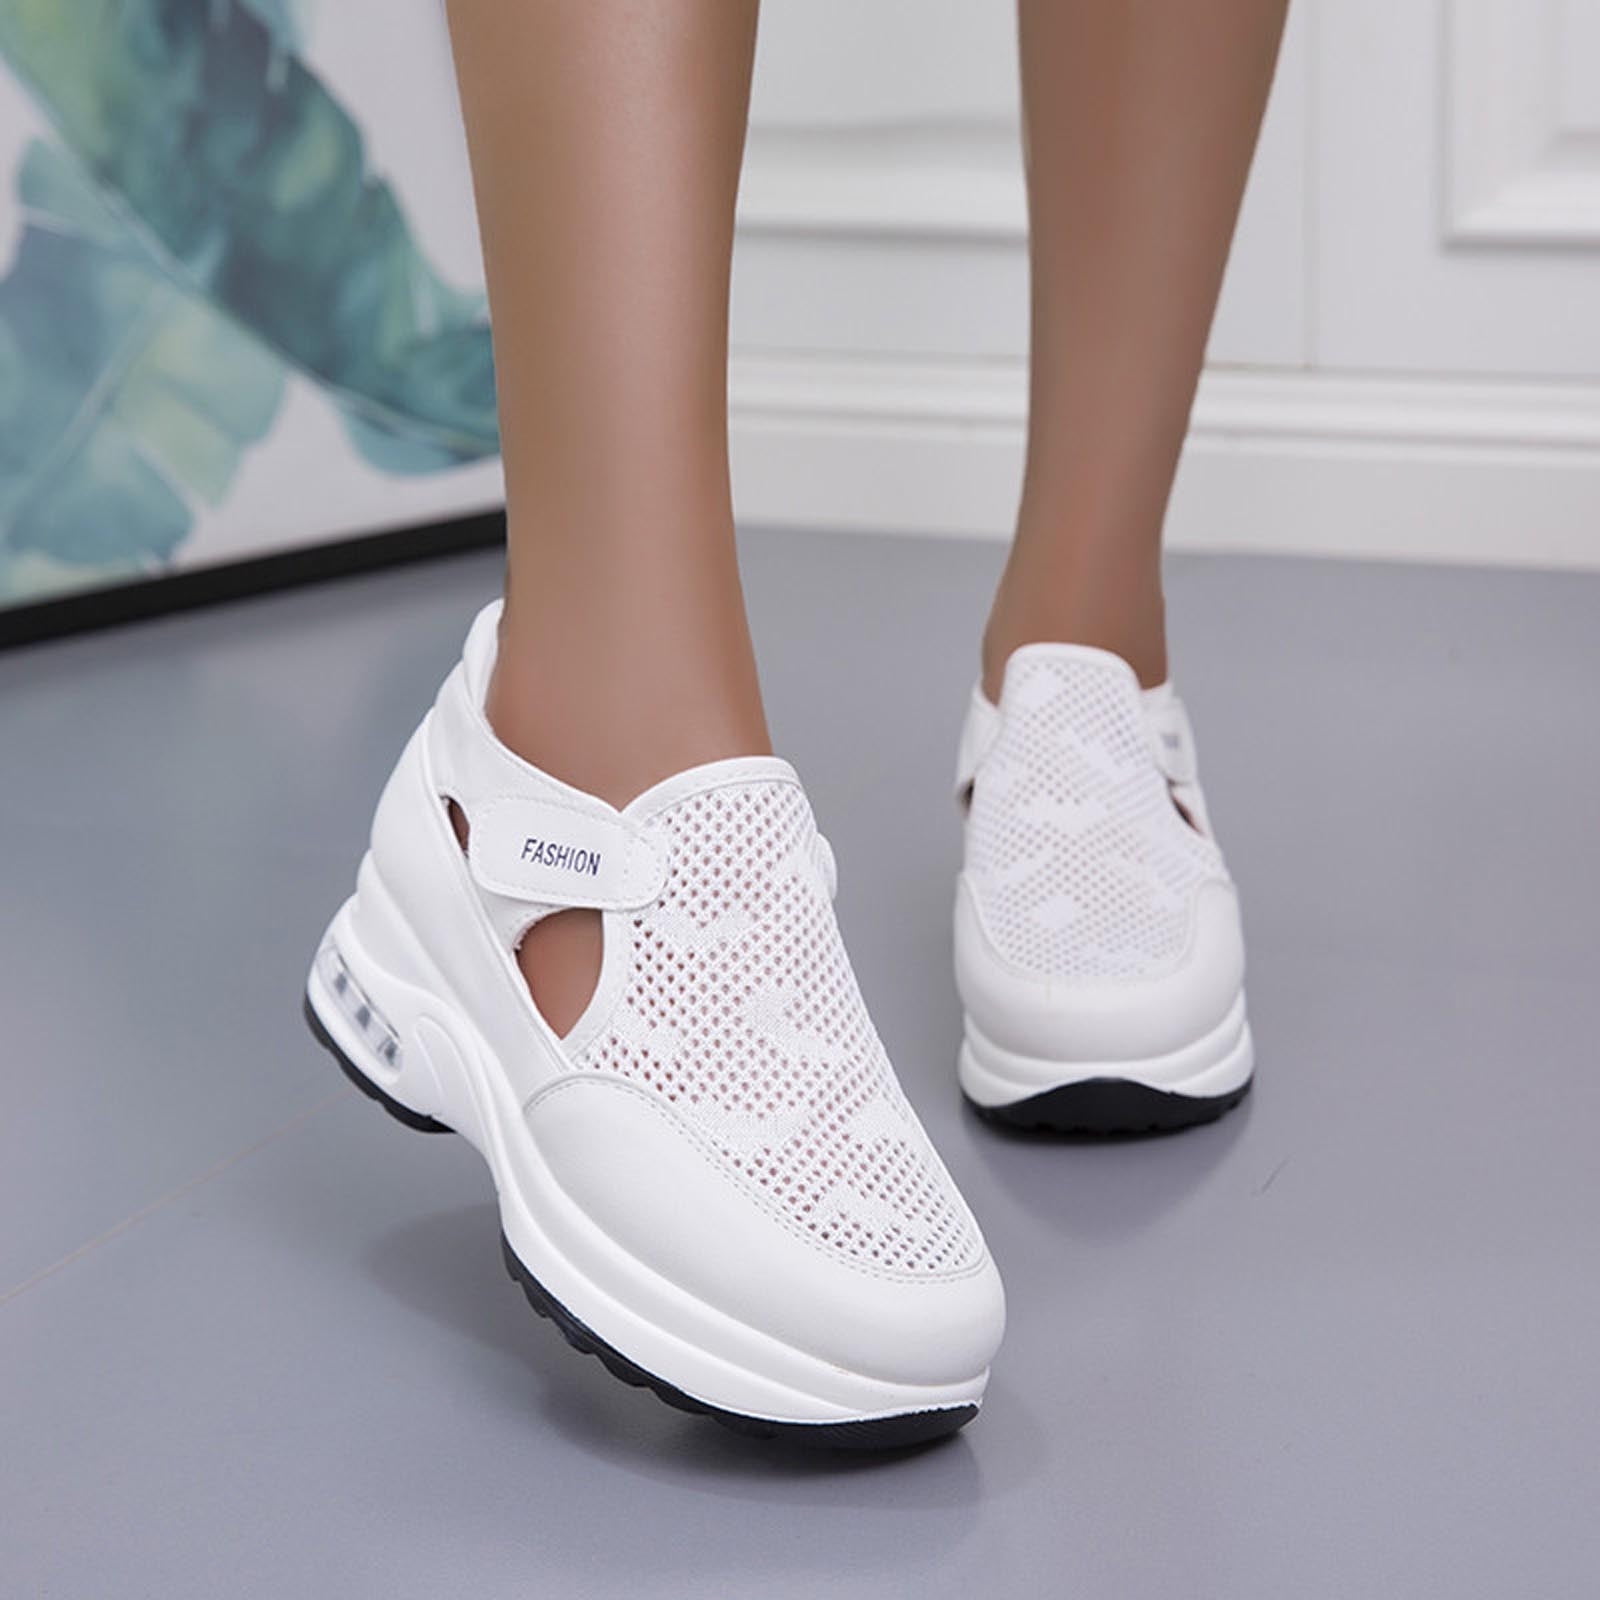 Buy Women White Stylish Casual Sneakers | Women's Sneaker Shoes | Lace Up |  Casual | Comfortable Shoes UK/India 03 at Amazon.in